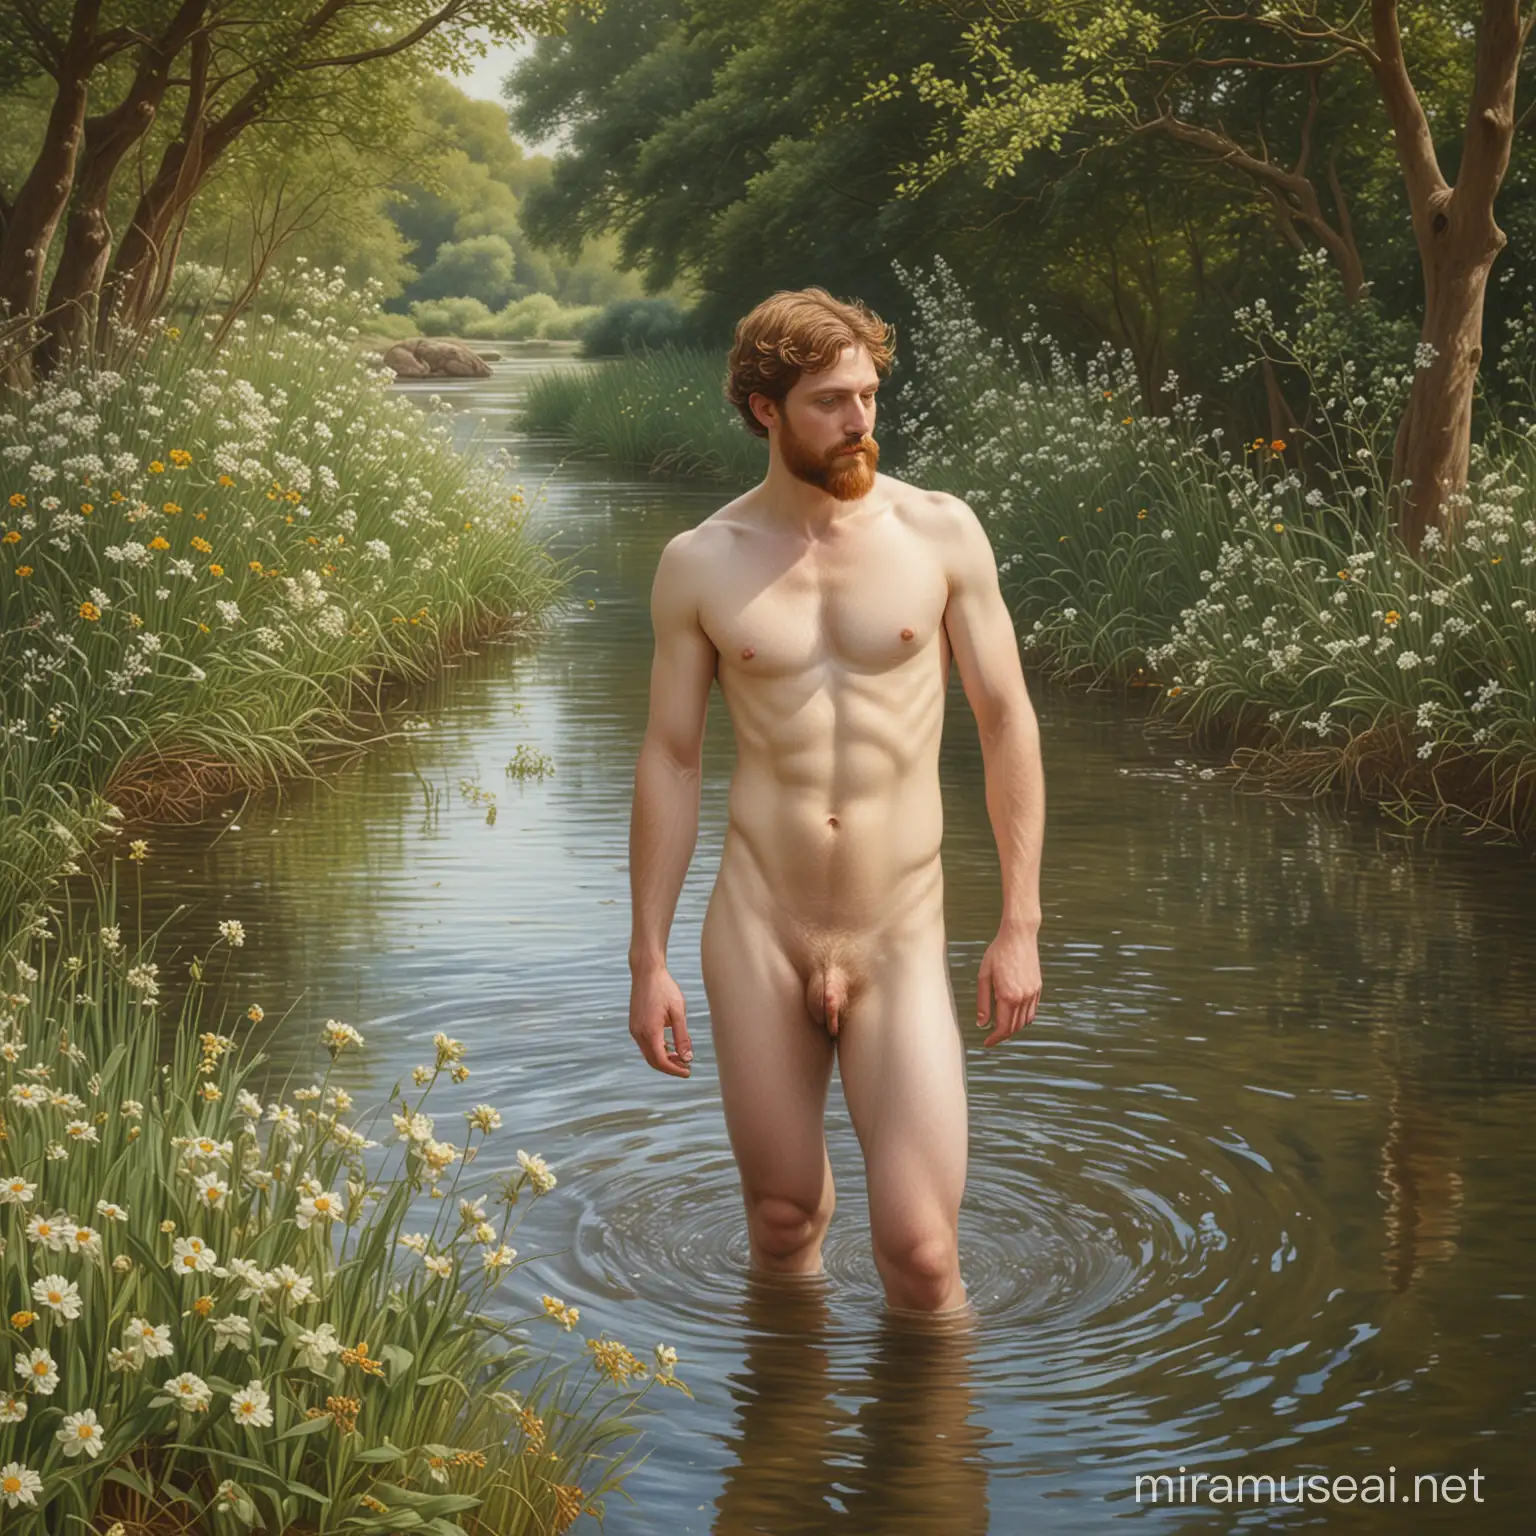 PreRaphaelite Oil Painting of Man Bathing in Clear River with Trees and Flowers